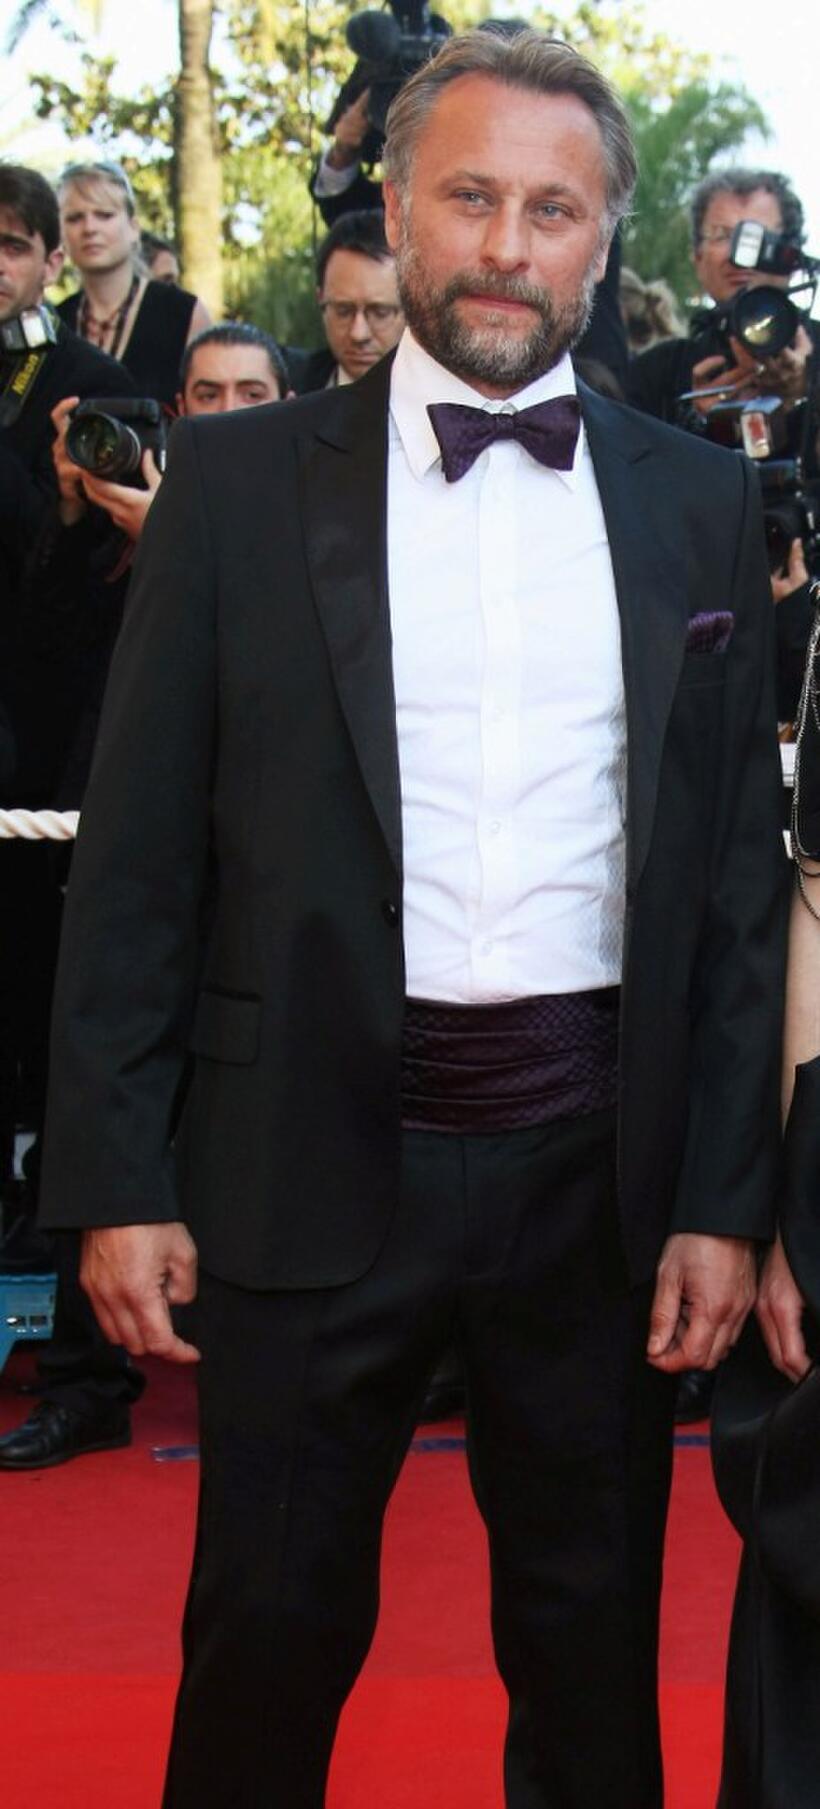 Michael Nyqvist at the premiere of "A Prophet" during the 62nd International Cannes Film Festival.